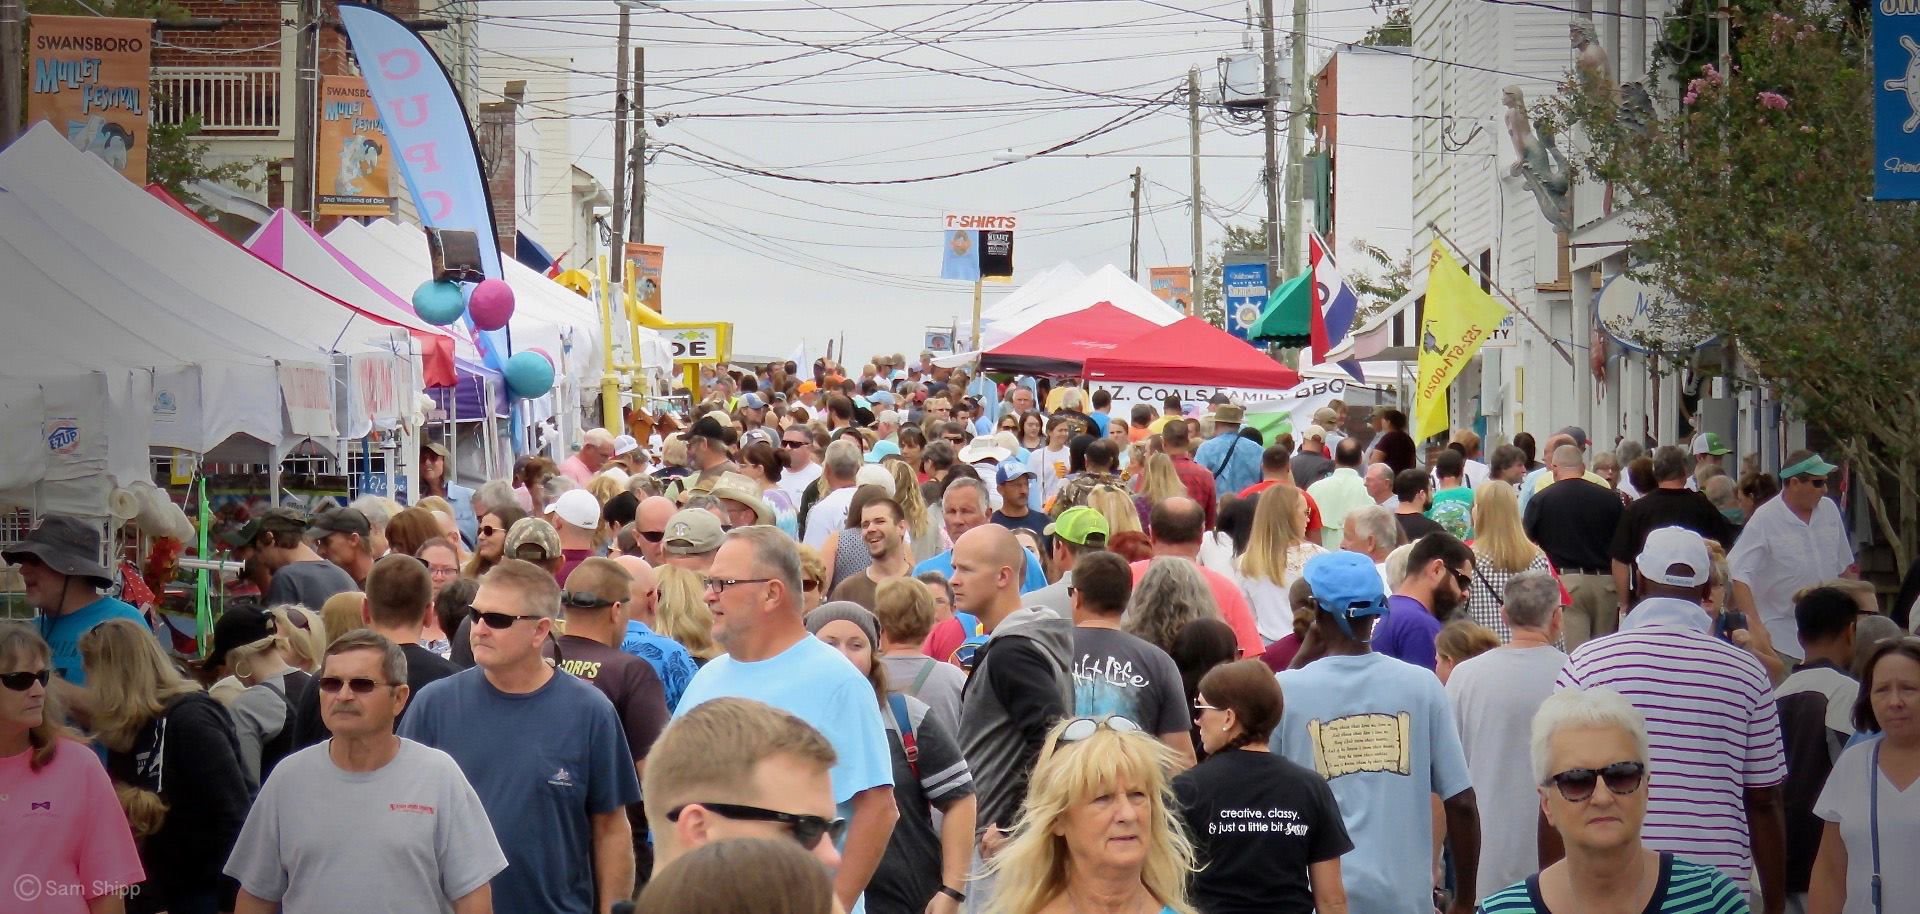 Mullet Festival - Things to do in Swansboro